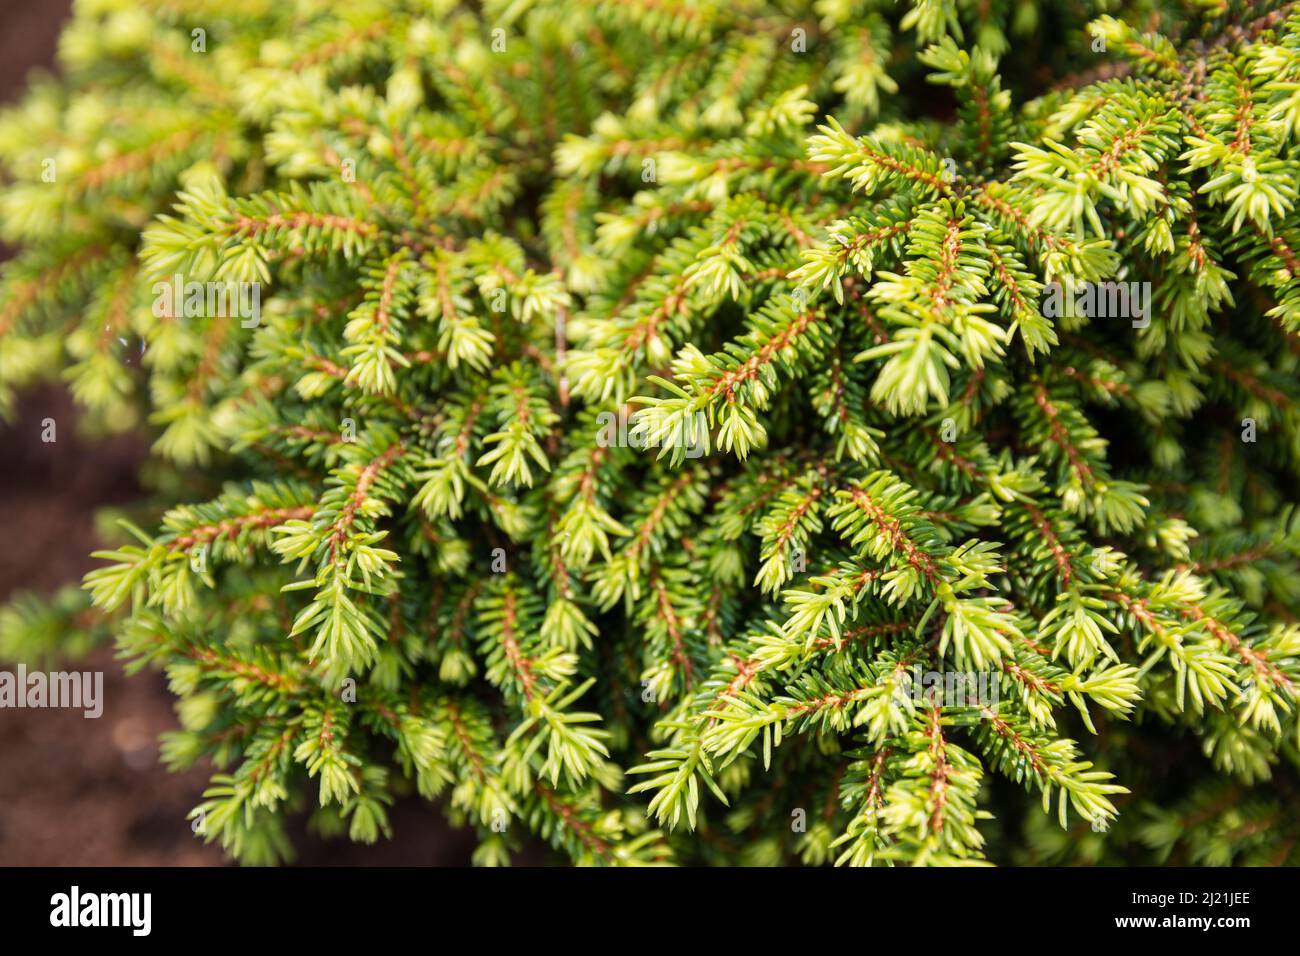 Dwarf ornamental spruce variety Nidiformis (Picea abies, Norway spruce or European spruce). Branches with young shoots of annual growth. Natural backg Stock Photo